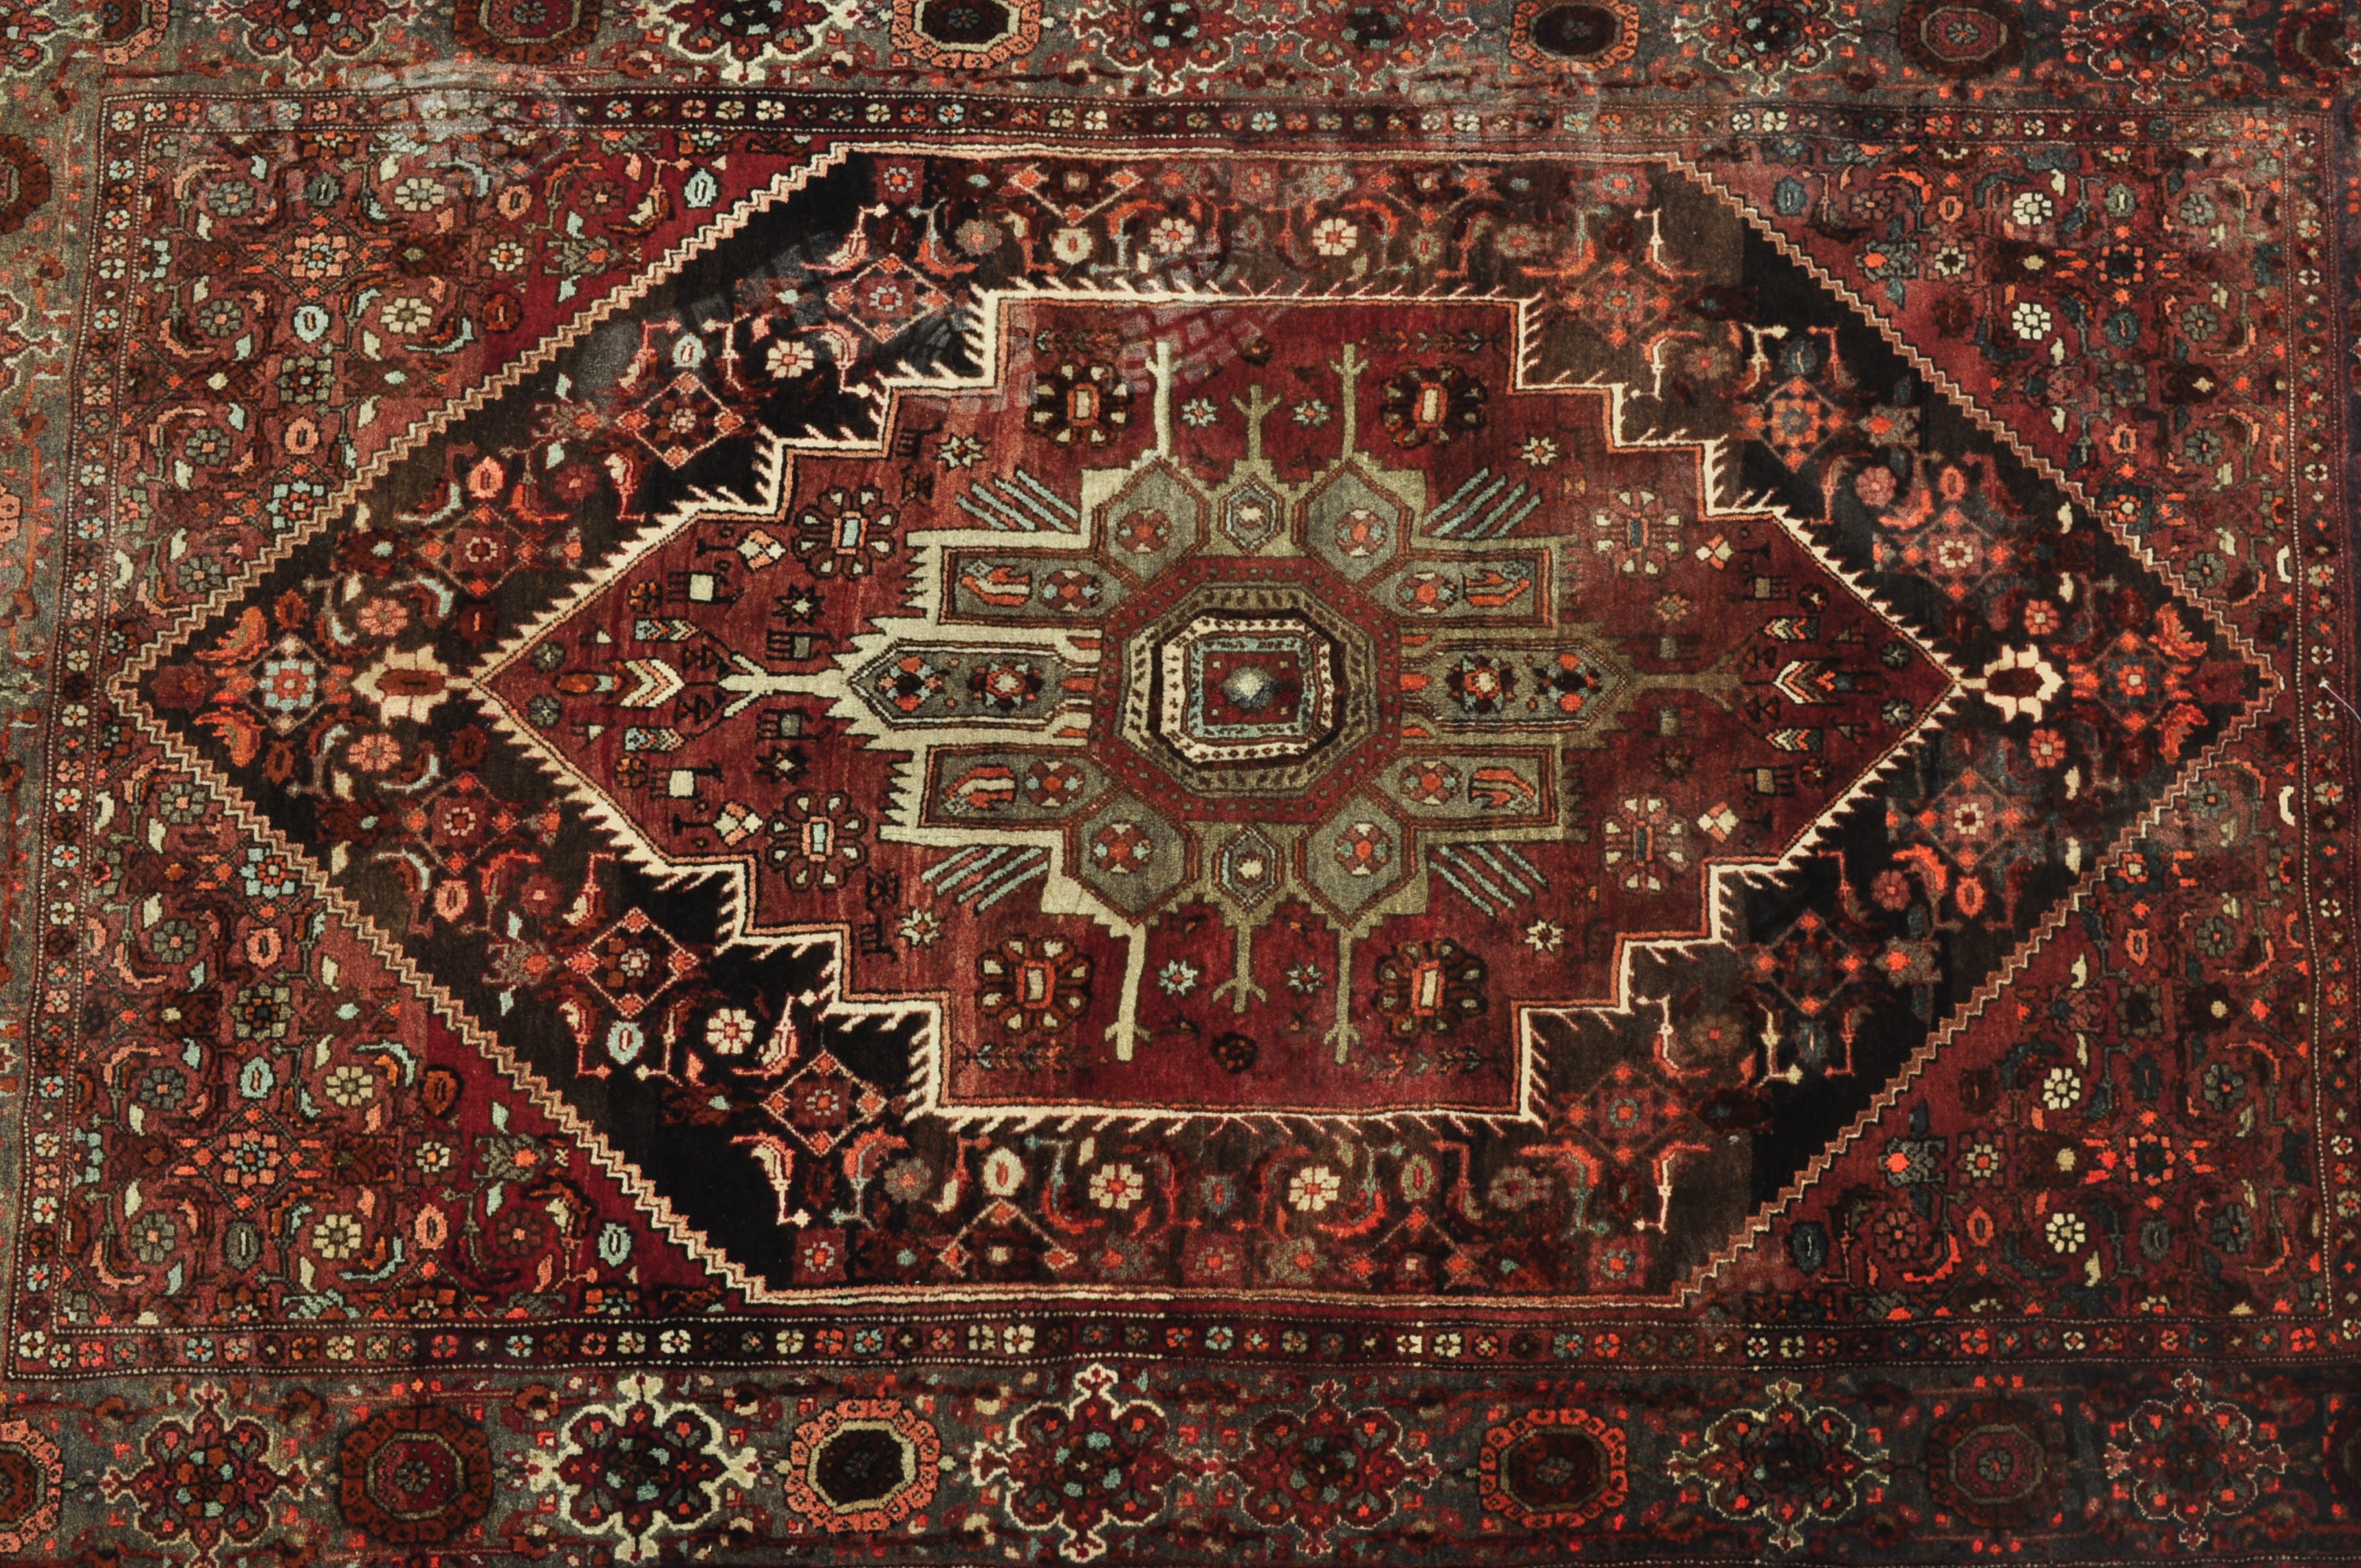 MID 20TH CENTURY PERSIAN ISLAMIC THICK PILE RUG - Image 3 of 6